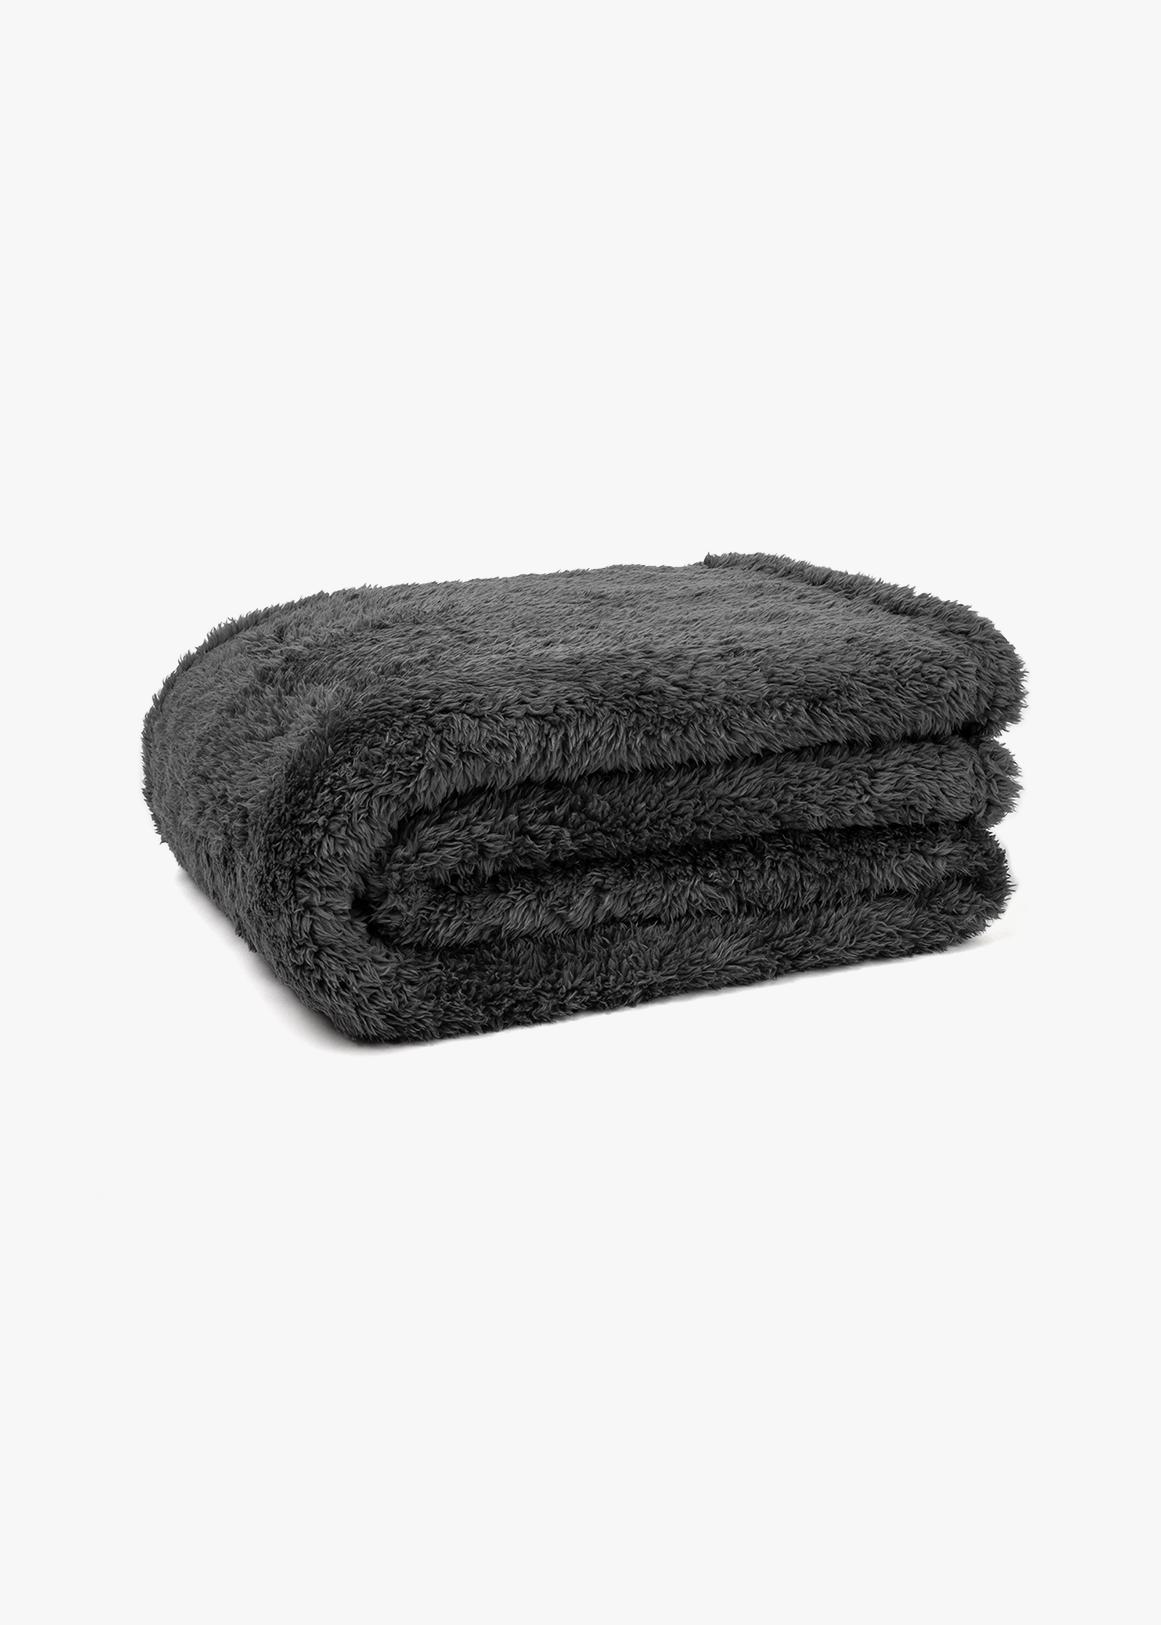 Sth African Woolworths Grey Extra Soft Wire-Free Microfiber Full